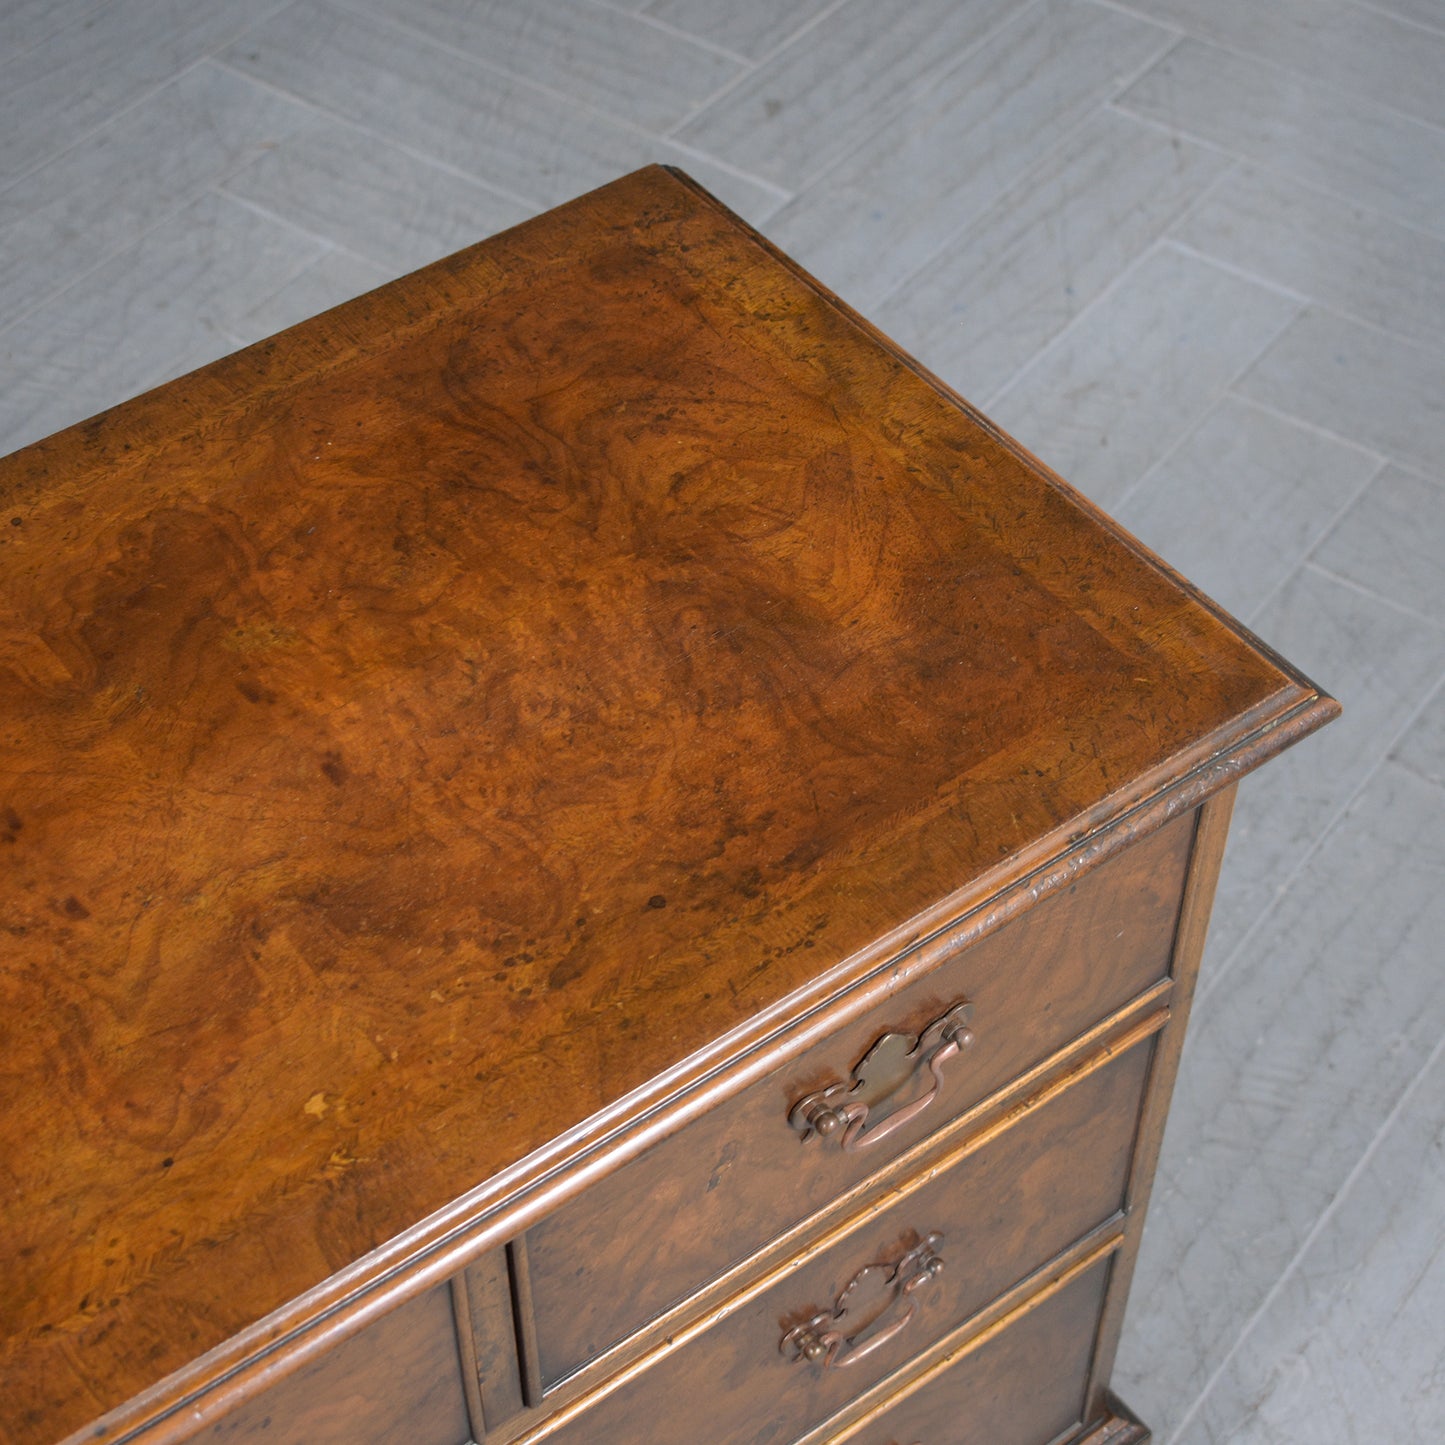 Restored Early 1950s Burled Veneers Chest of Drawers: A Vintage Patina Finish